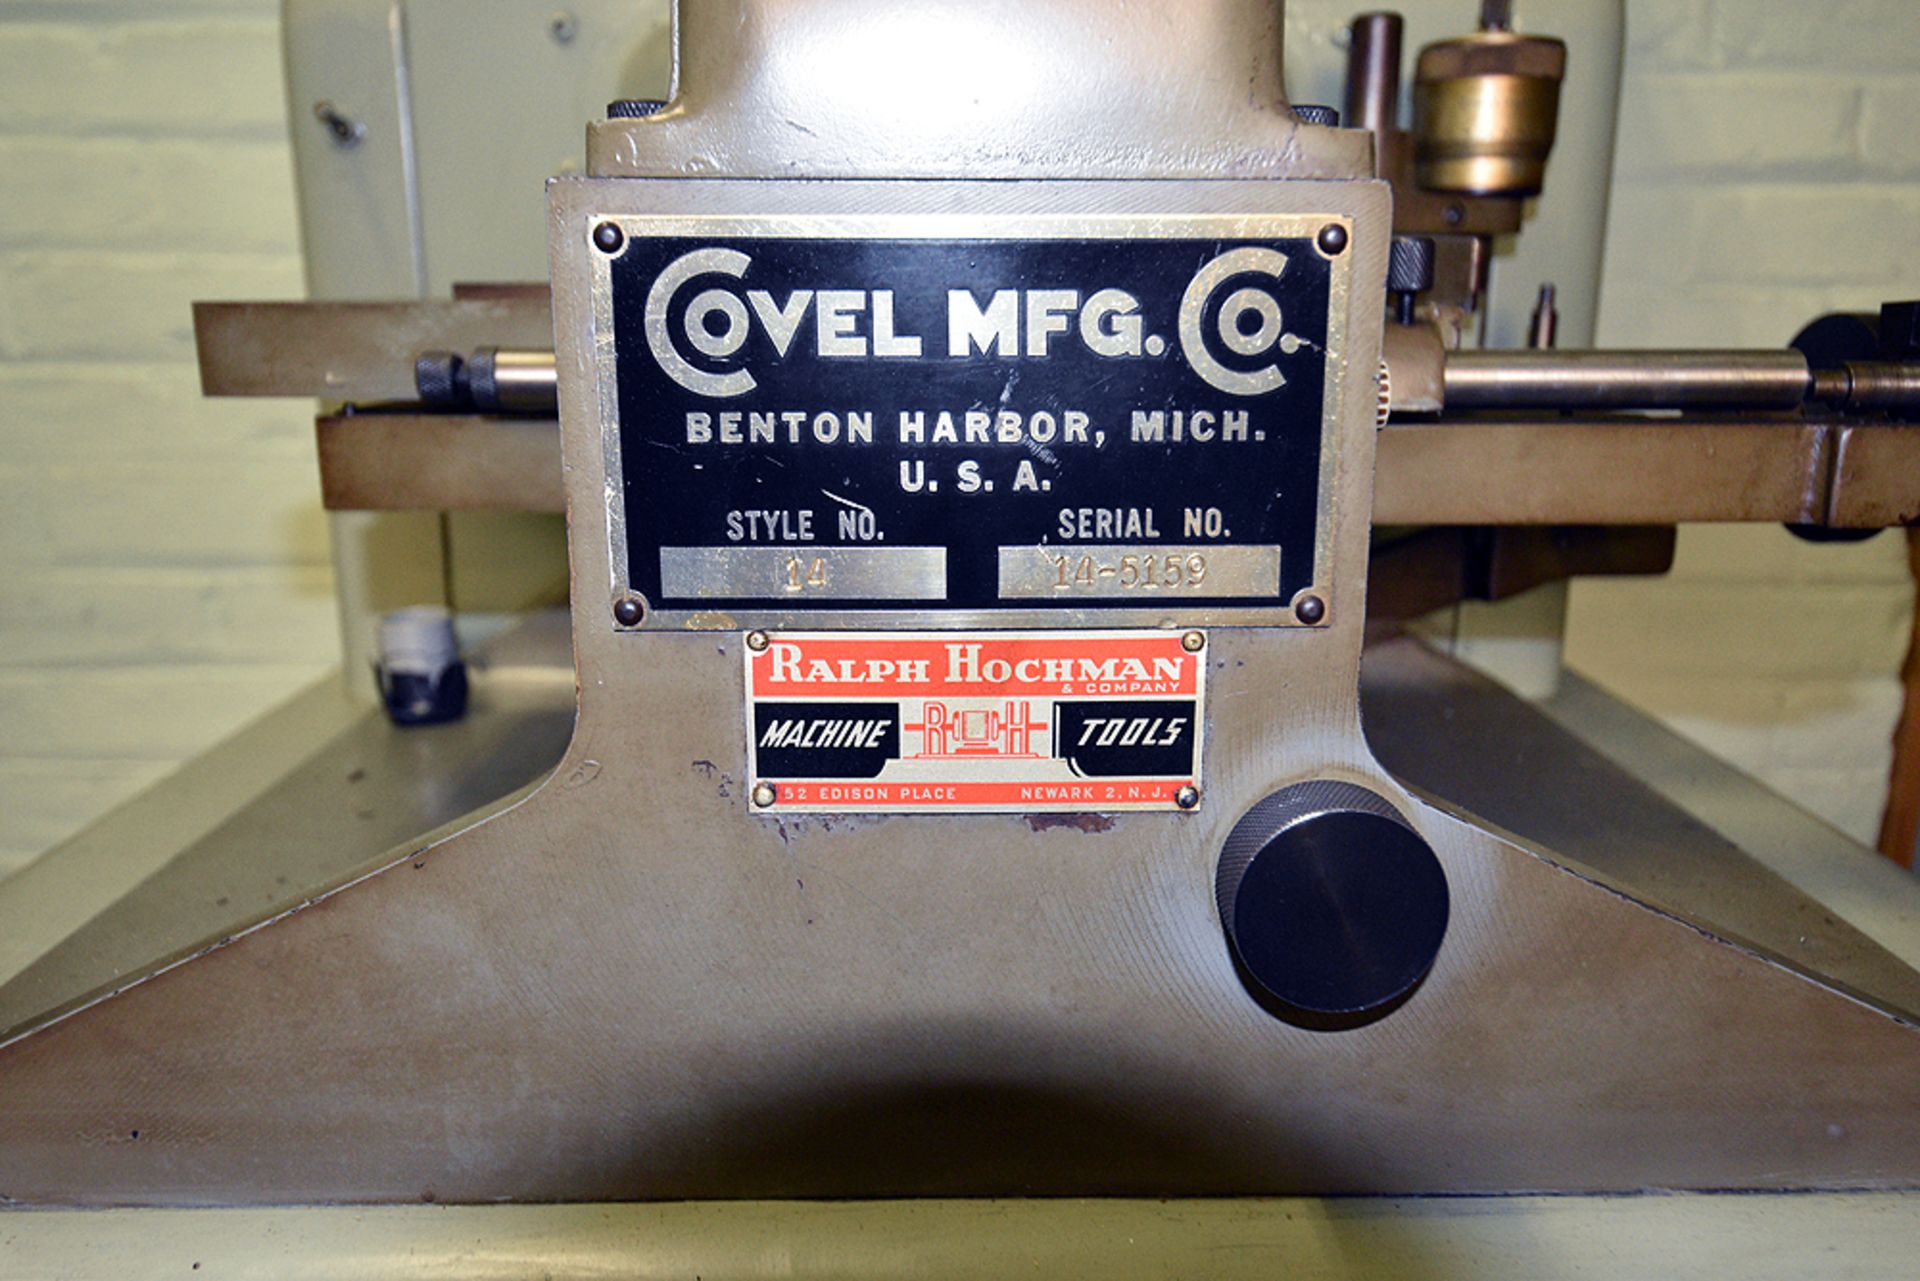 Covel Style Number 14 Serial Number: 14-5159 Quality Tester - Image 5 of 7